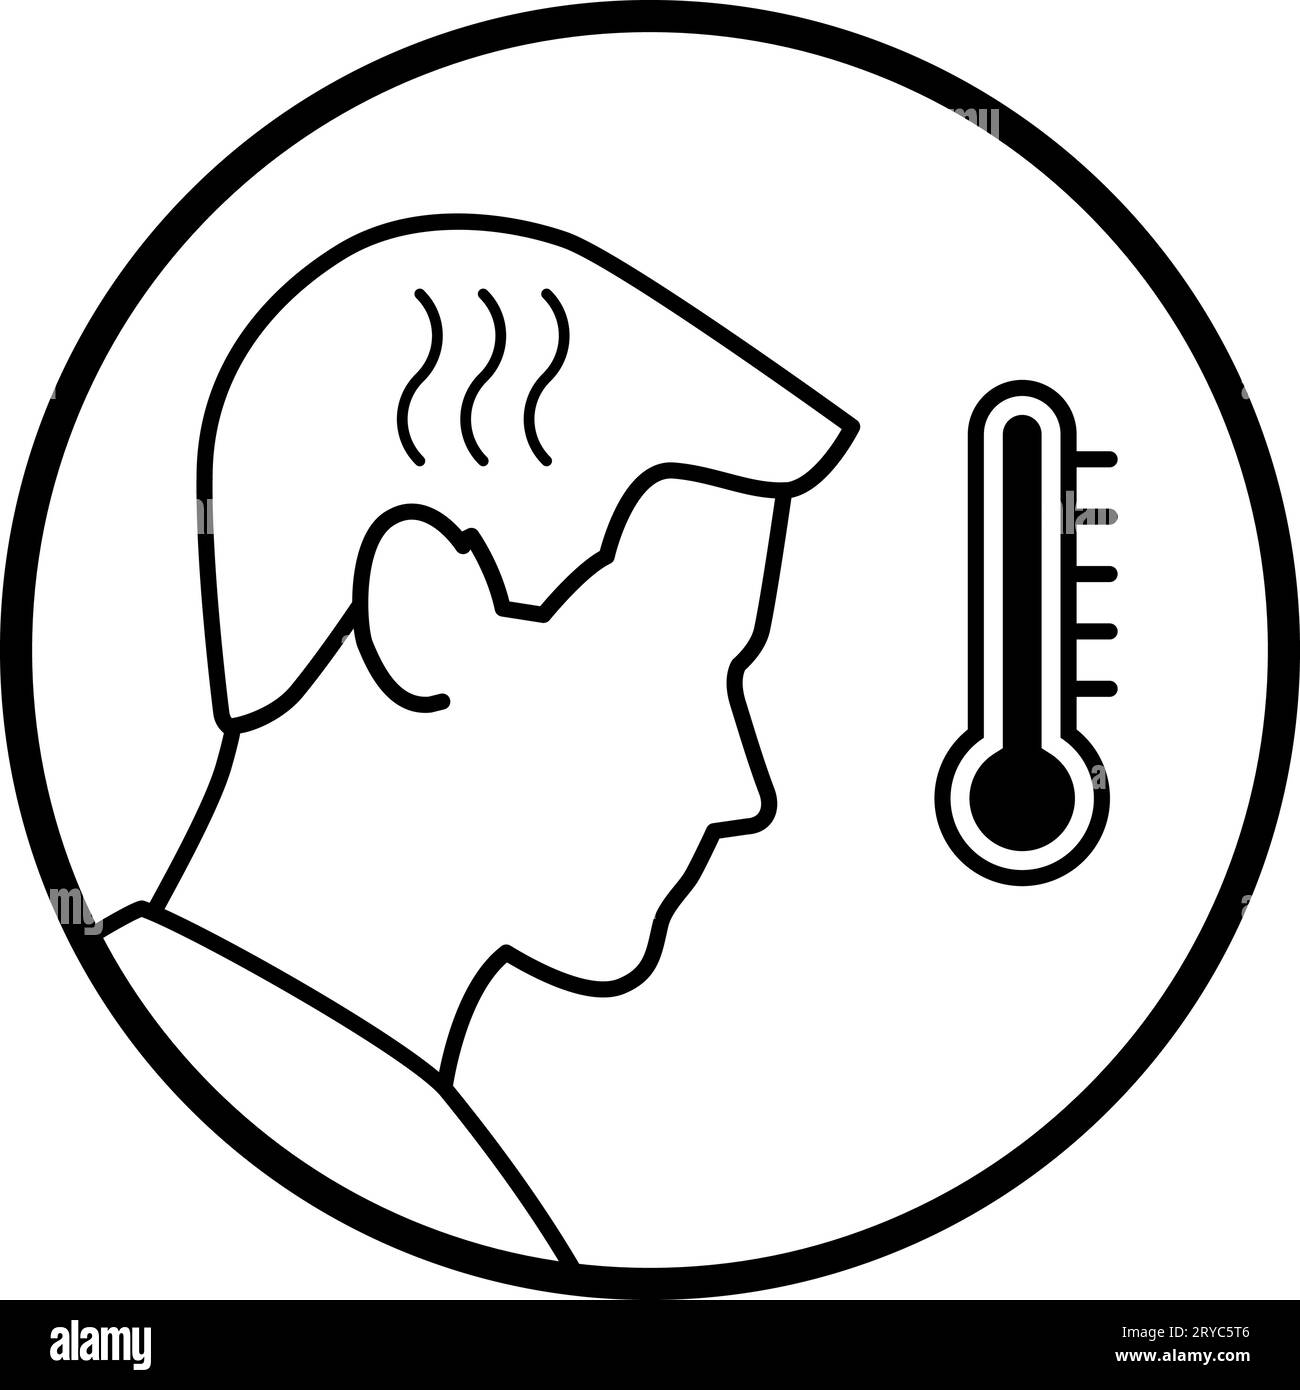 Sick man with fever and hot thermometer, isolated icon Stock Vector